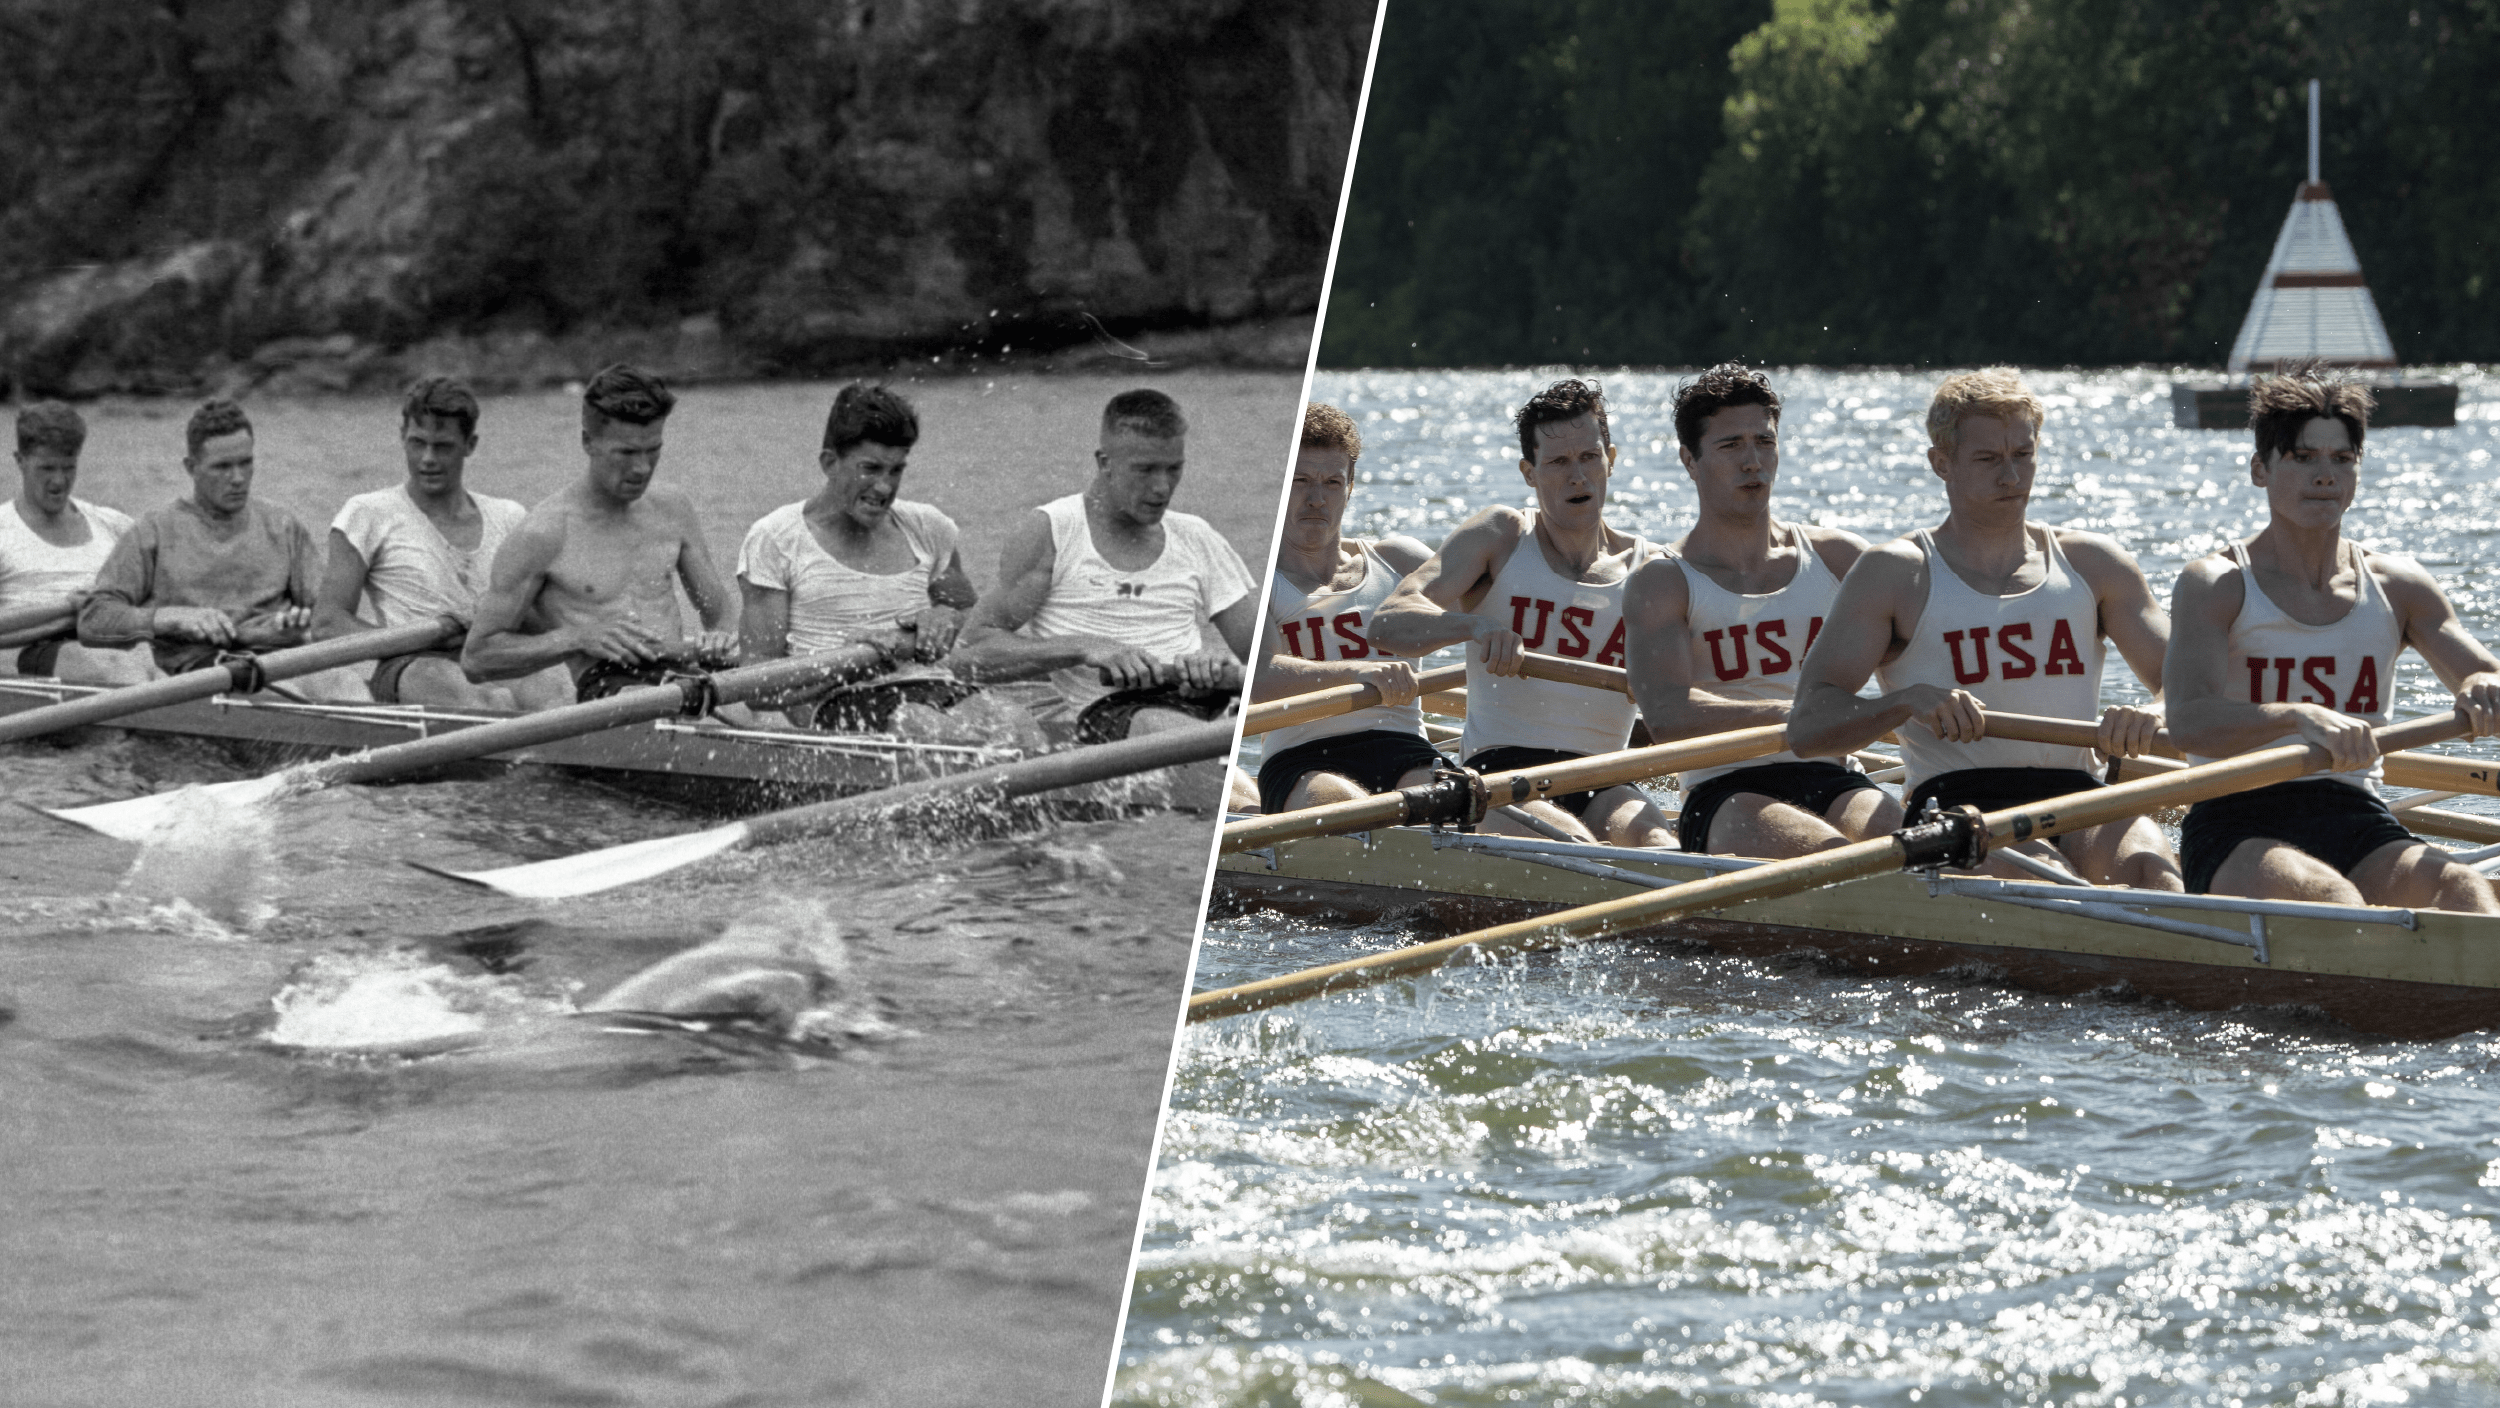 How Olympic rowing coach Terry O'Neill taught ‘The Boys in the Boat'
actors to row